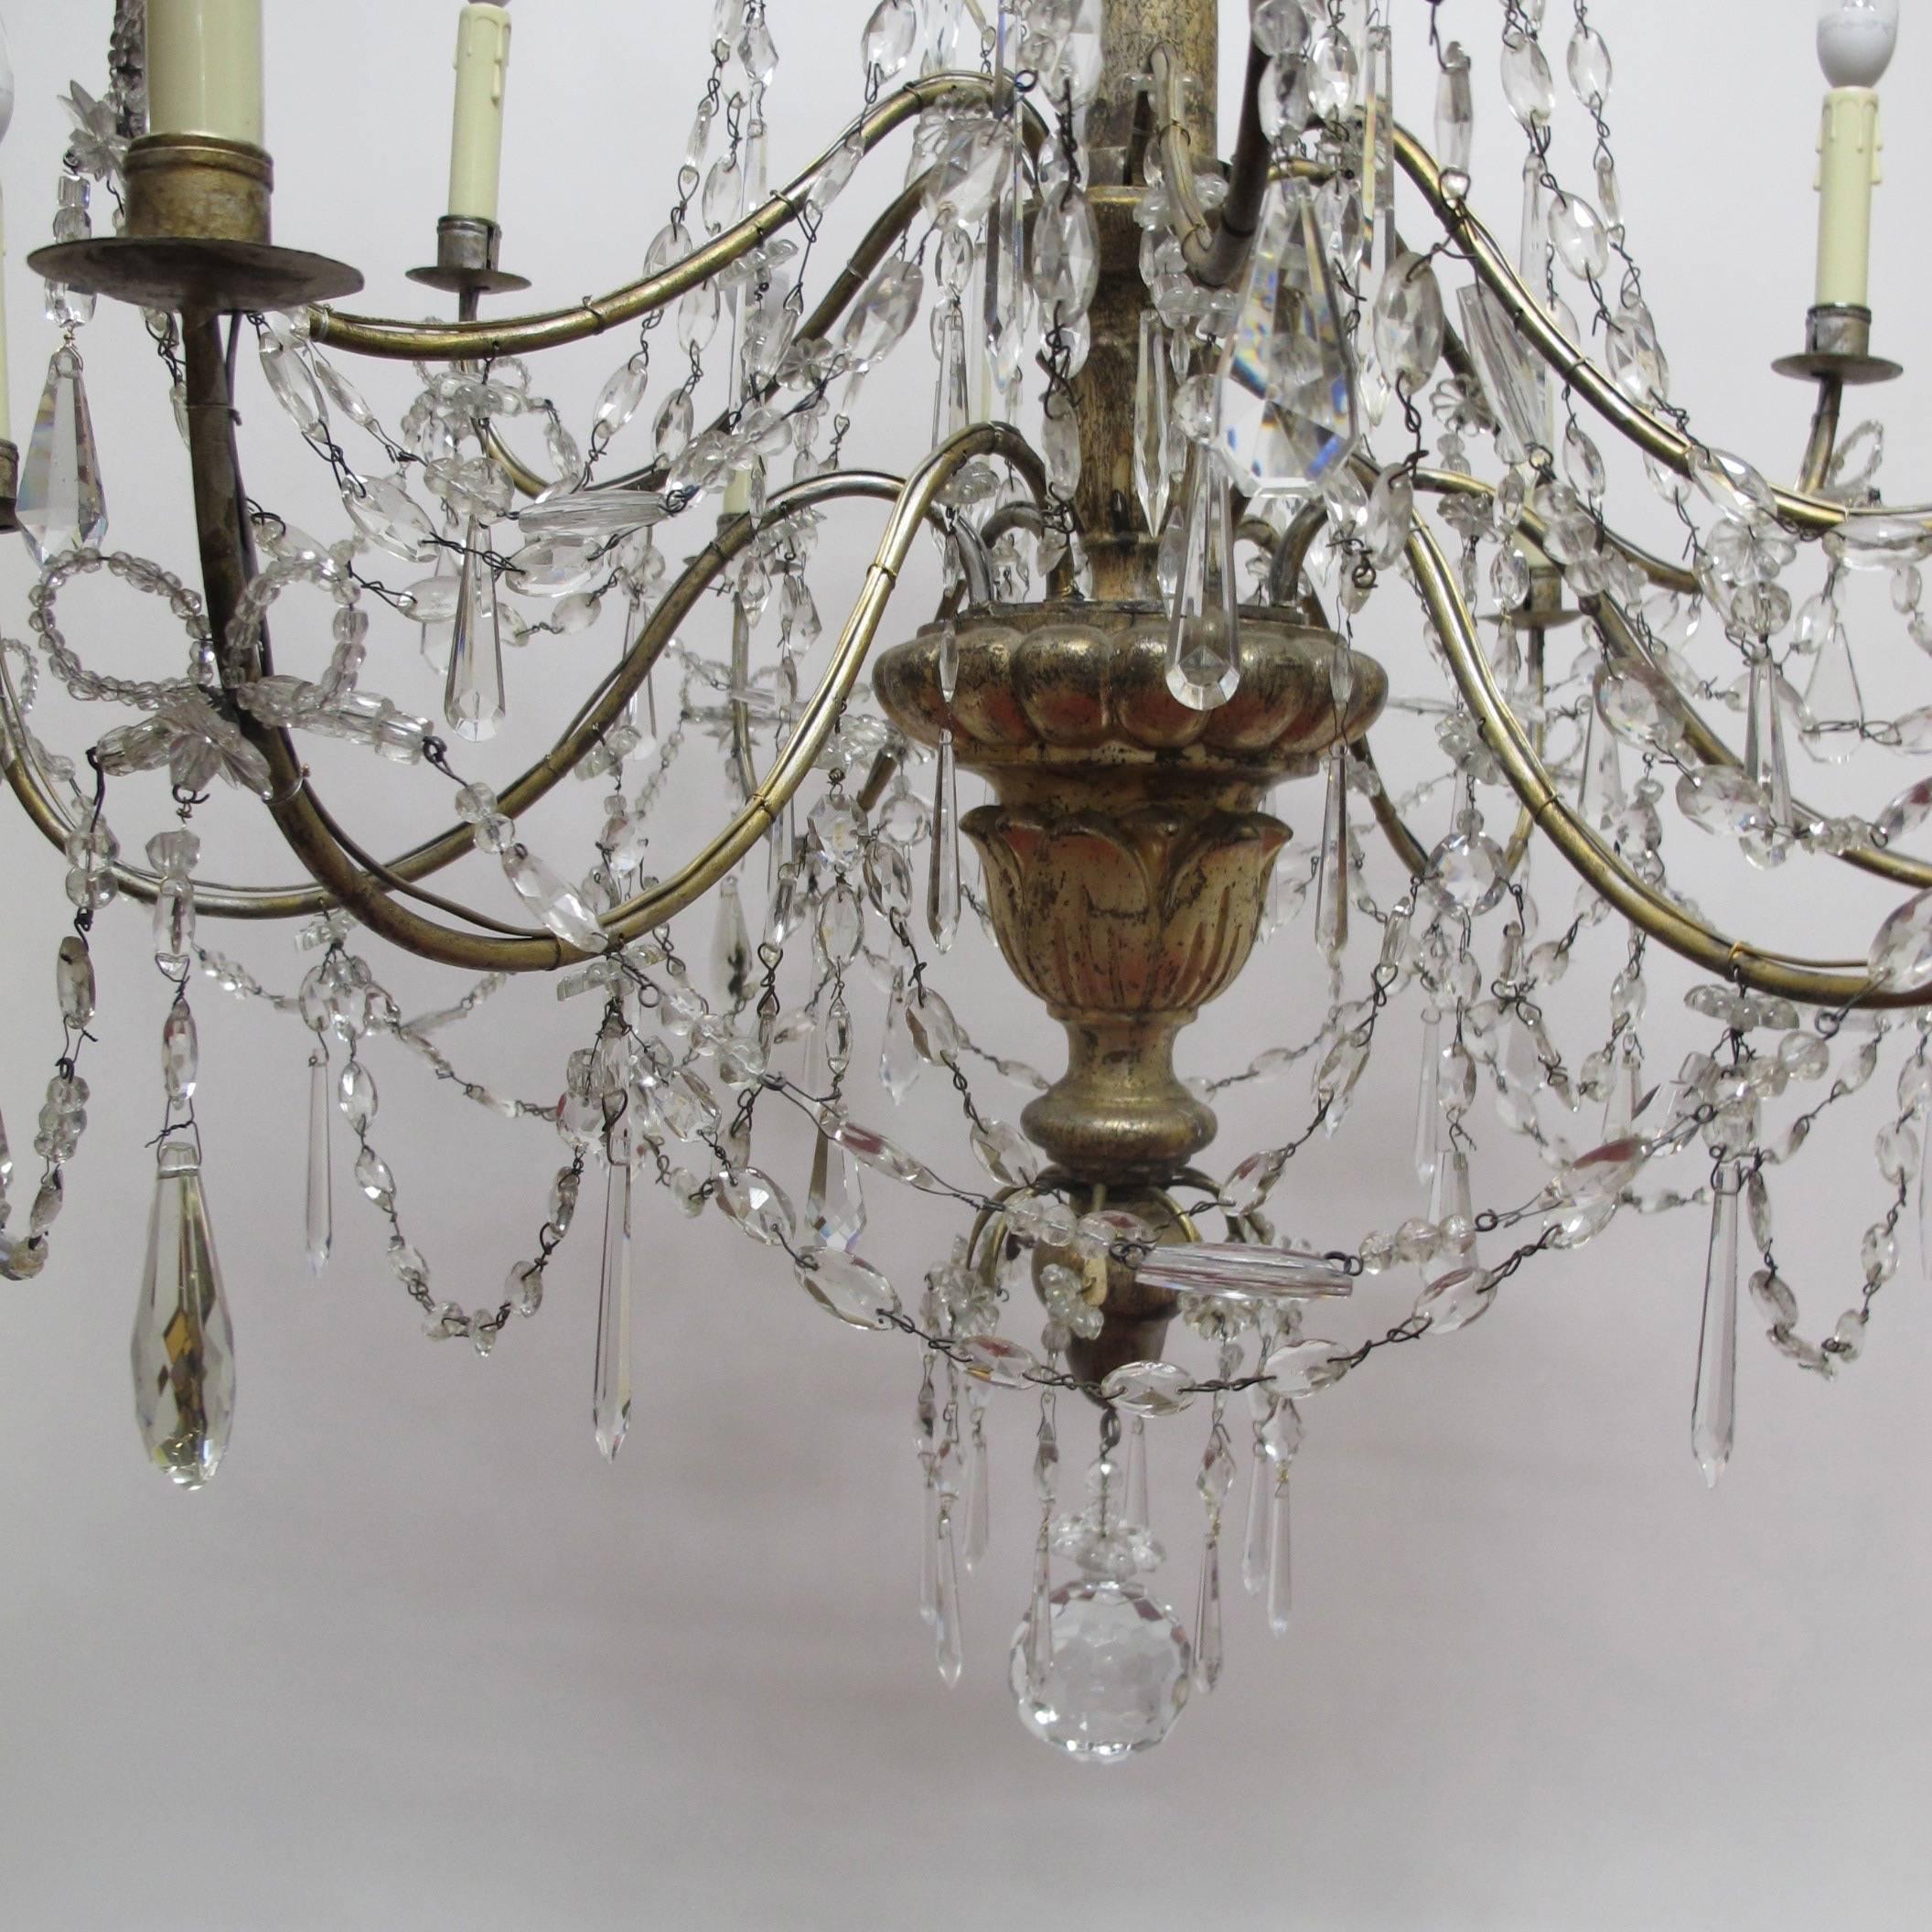 18th Century and Earlier Large Silver Gilt Wood, Iron, and Crystal Chandelier, Italian 18th Century For Sale